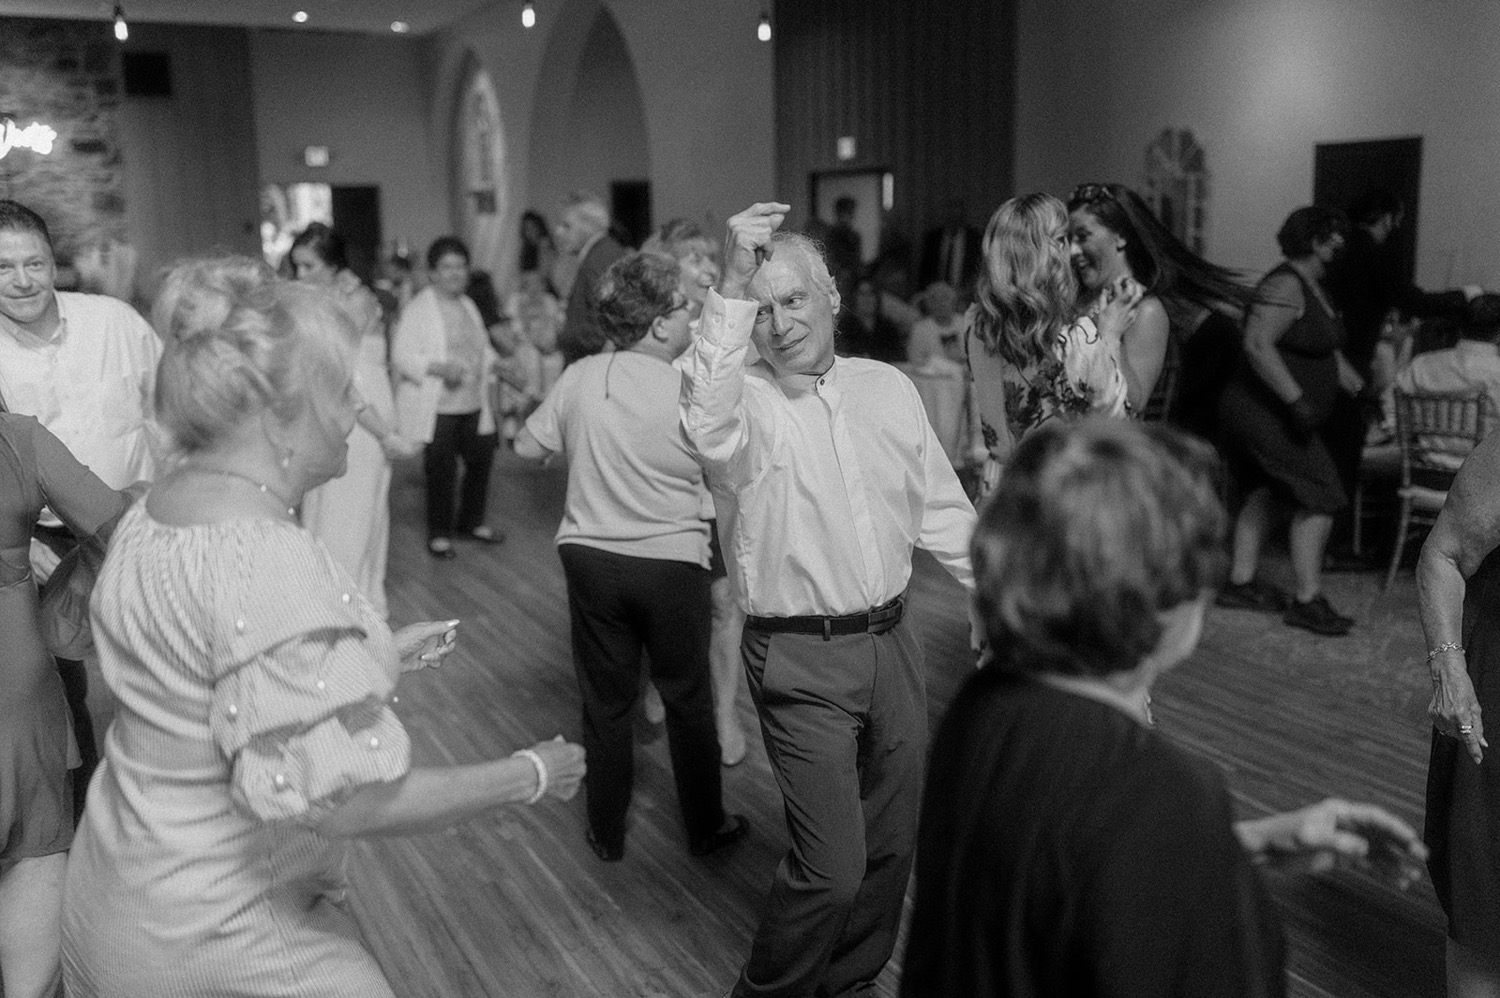 guests dancing at wedding reception black and white